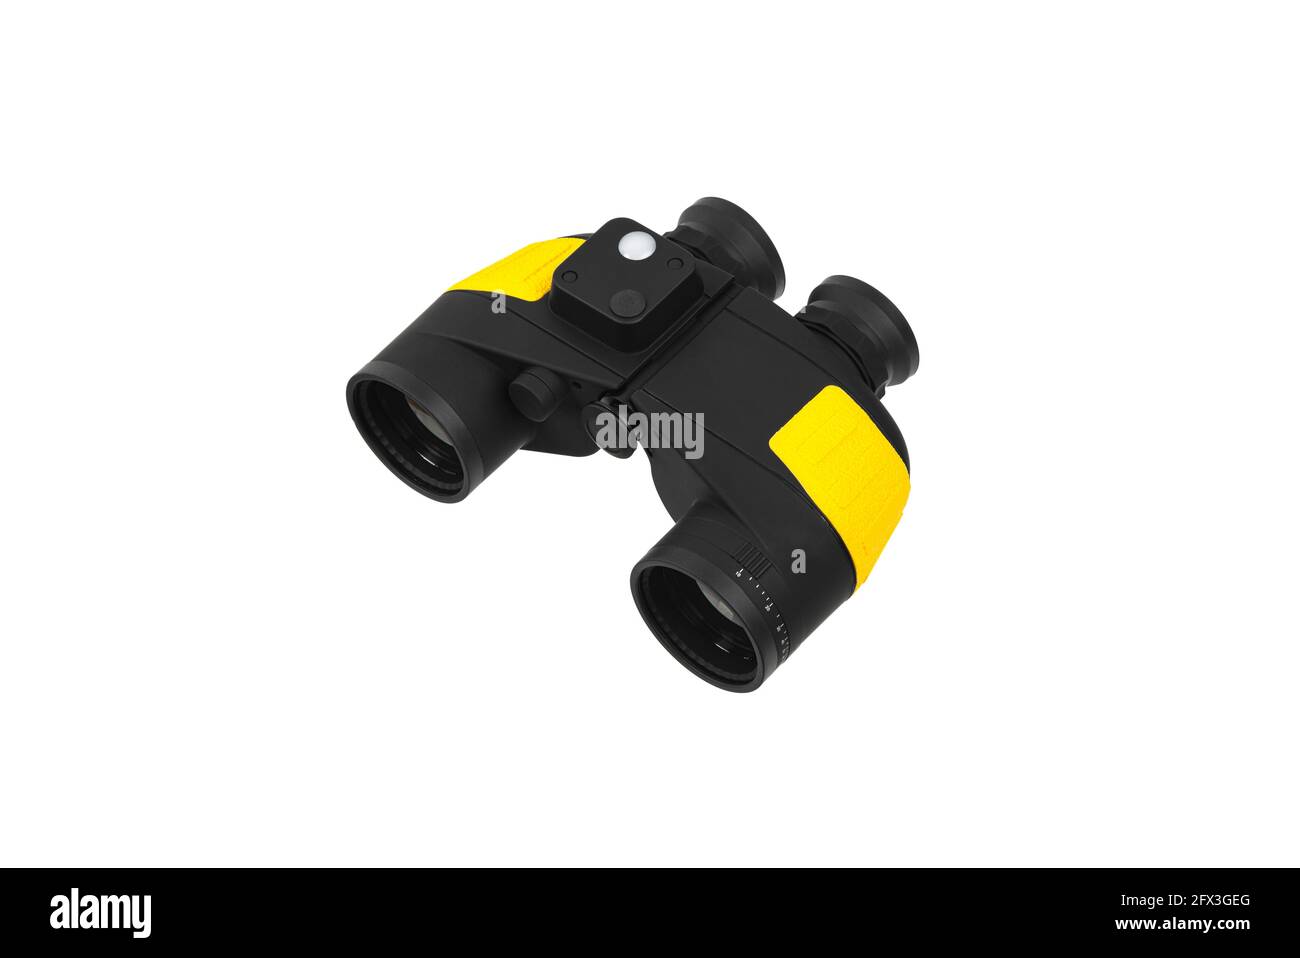 Modern black and yellow waterproof and unsinkable marine binoculars.. Surveillance device. Device for viewing at a distance. Isolate on a white backgr Stock Photo